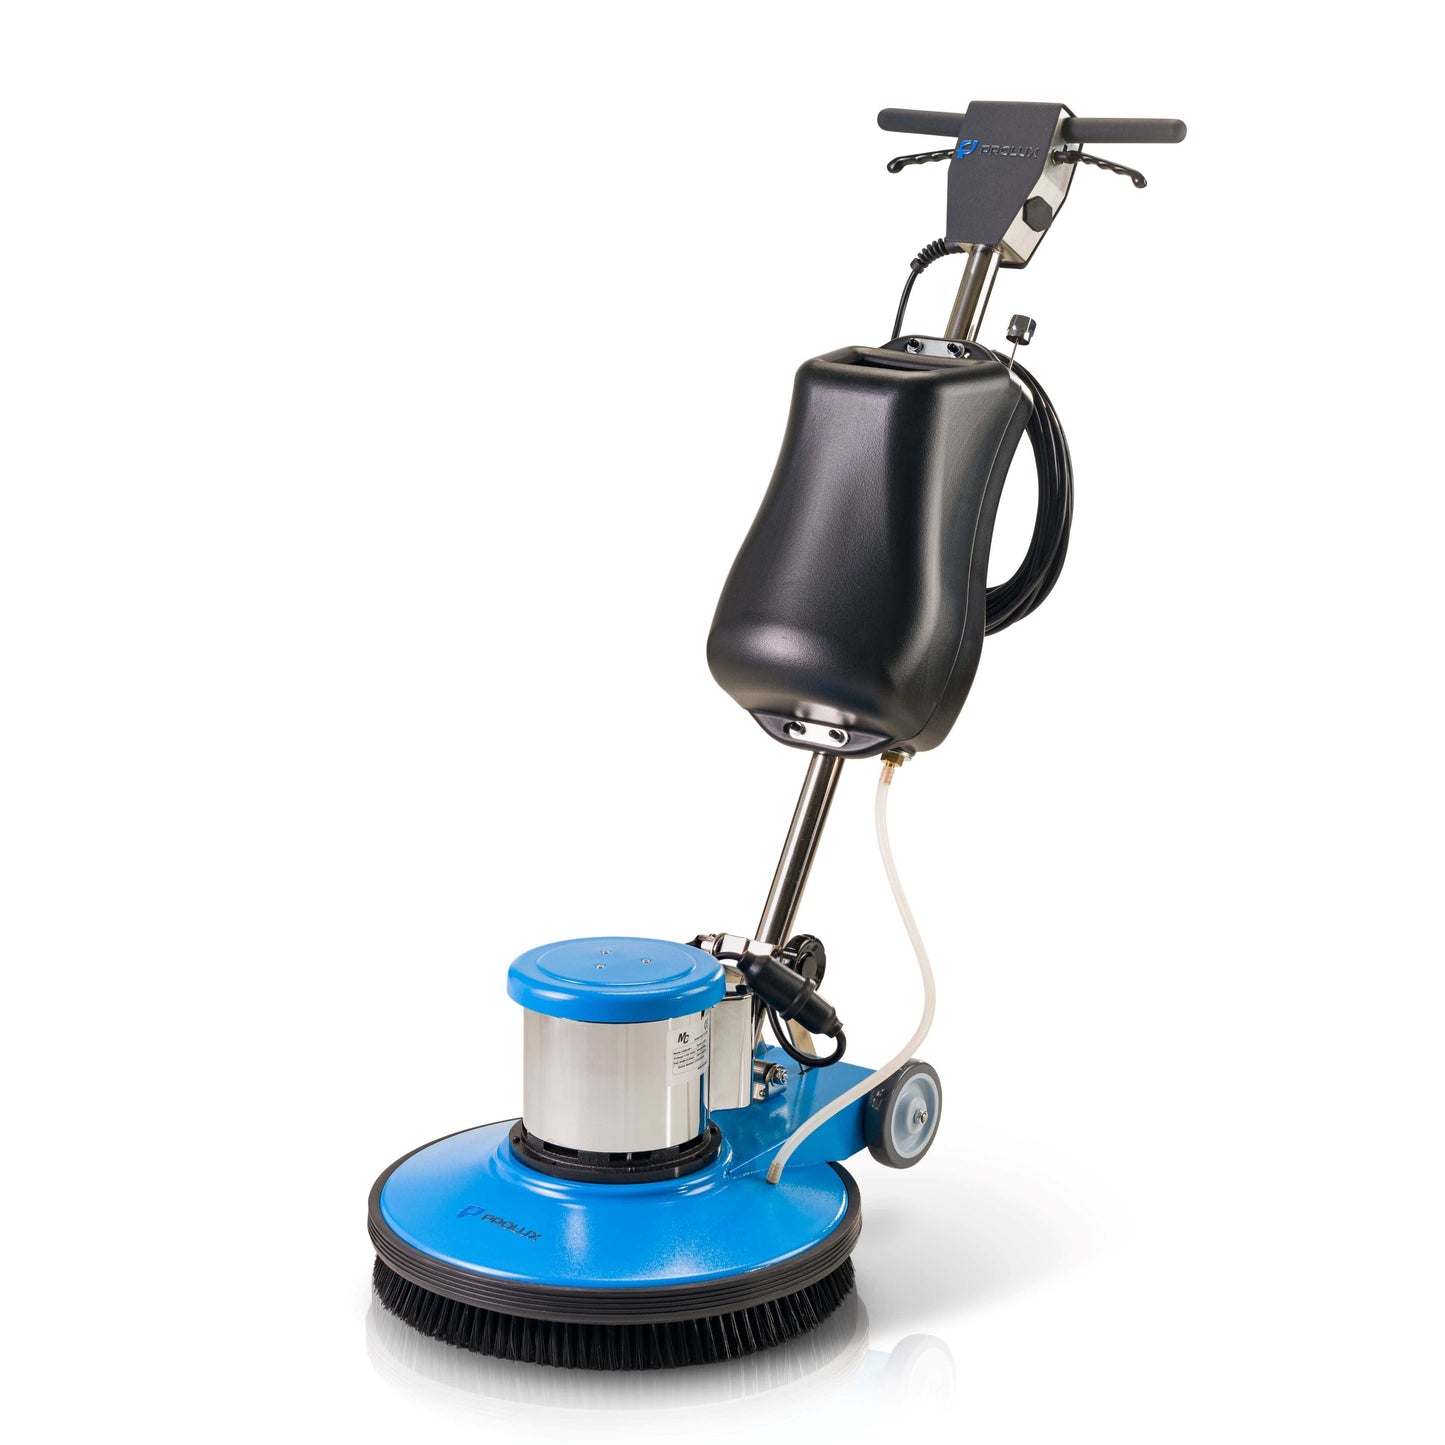 Prolux FM15P20 20" Commercial Floor Buffer Scrubber and Polisher w/ Solution Spray Tank